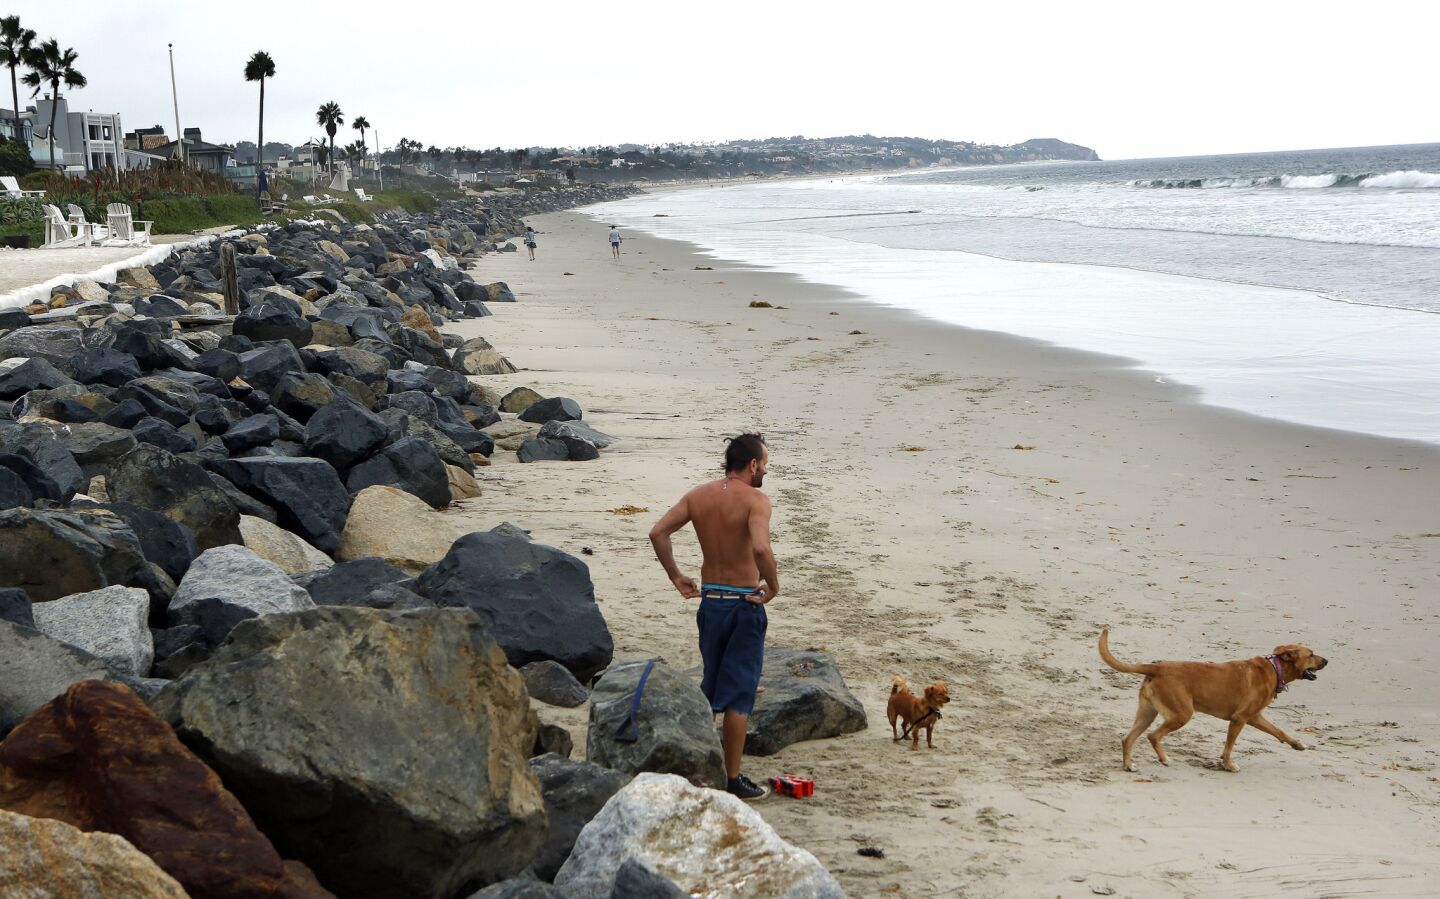 Dog trainer Chris Penketh, 45, of Woodland Hills, visits Broad Beach in Malibu. A sand replenishment project has been approved.